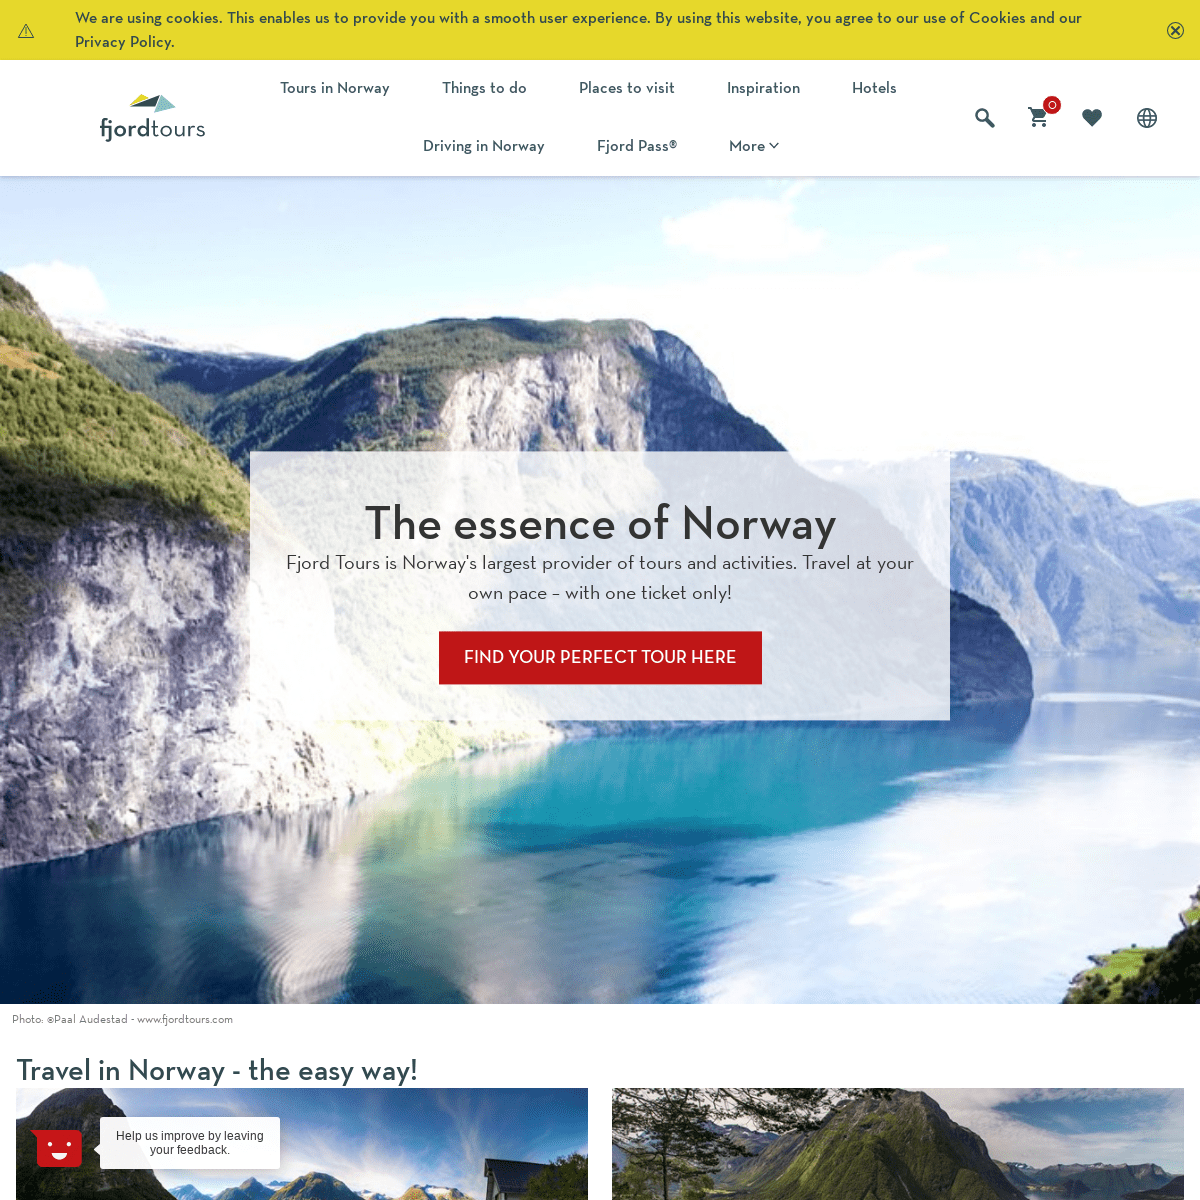 Fjord Tours - Norway Travel - Norway in a Nutshell - Tours - Hotels - Activities